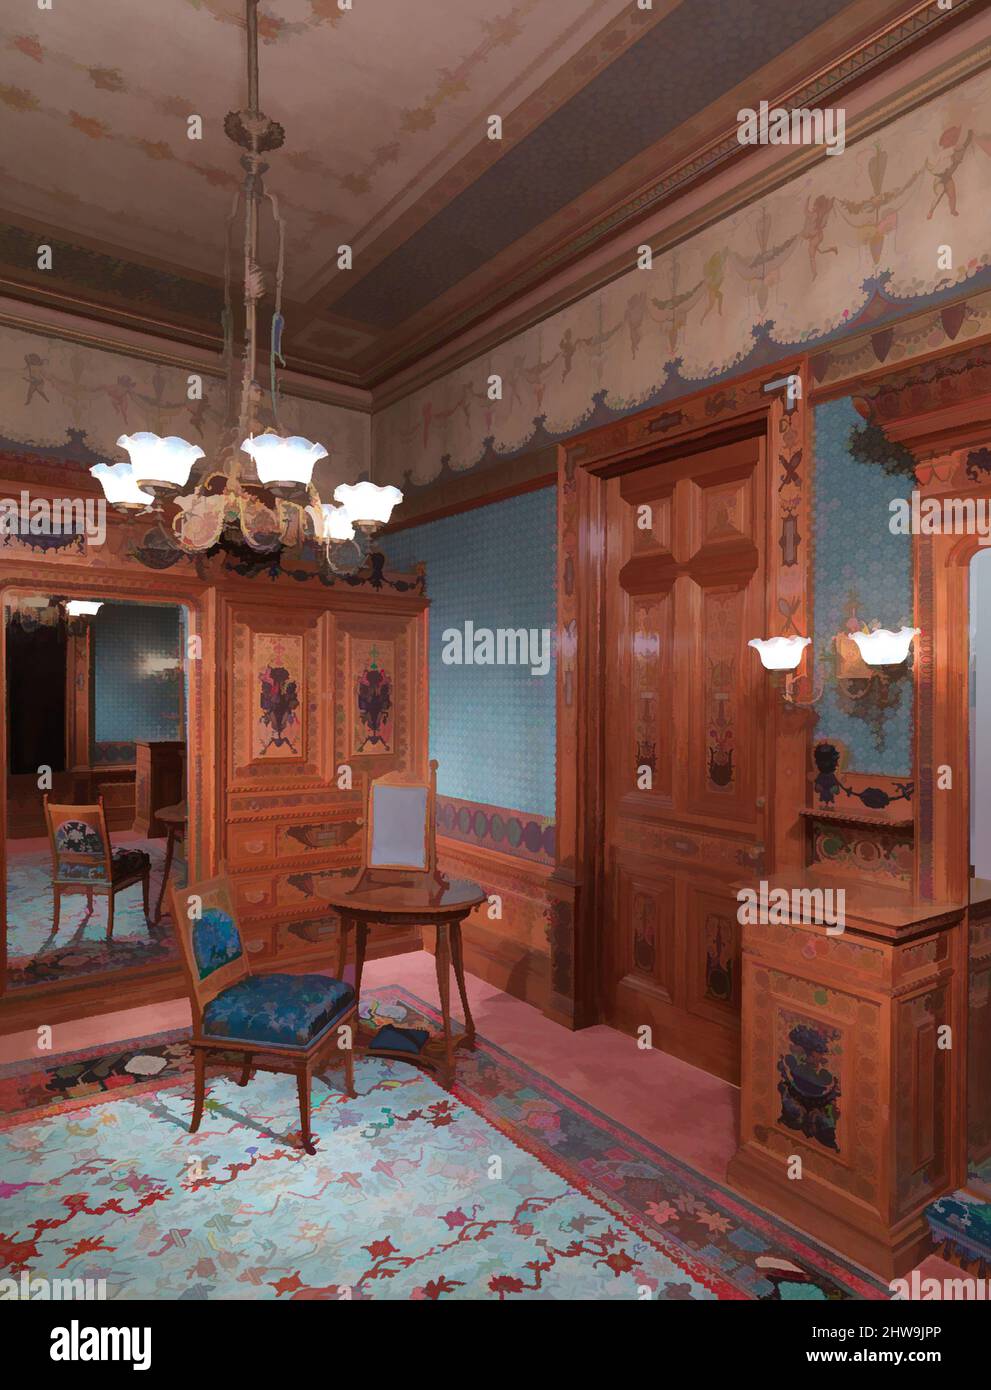 Art inspired by Architectural woodwork and paneling, 1881–82, Made in New York, New York, United States, American, Satinwood, purpleheart, mother-of-pearl, silver-plated brass, mirrored glass, marble, and reproduction upholstery, Architecture, George A. Schastey & Co. (1873–97), George, Classic works modernized by Artotop with a splash of modernity. Shapes, color and value, eye-catching visual impact on art. Emotions through freedom of artworks in a contemporary way. A timeless message pursuing a wildly creative new direction. Artists turning to the digital medium and creating the Artotop NFT Stock Photo